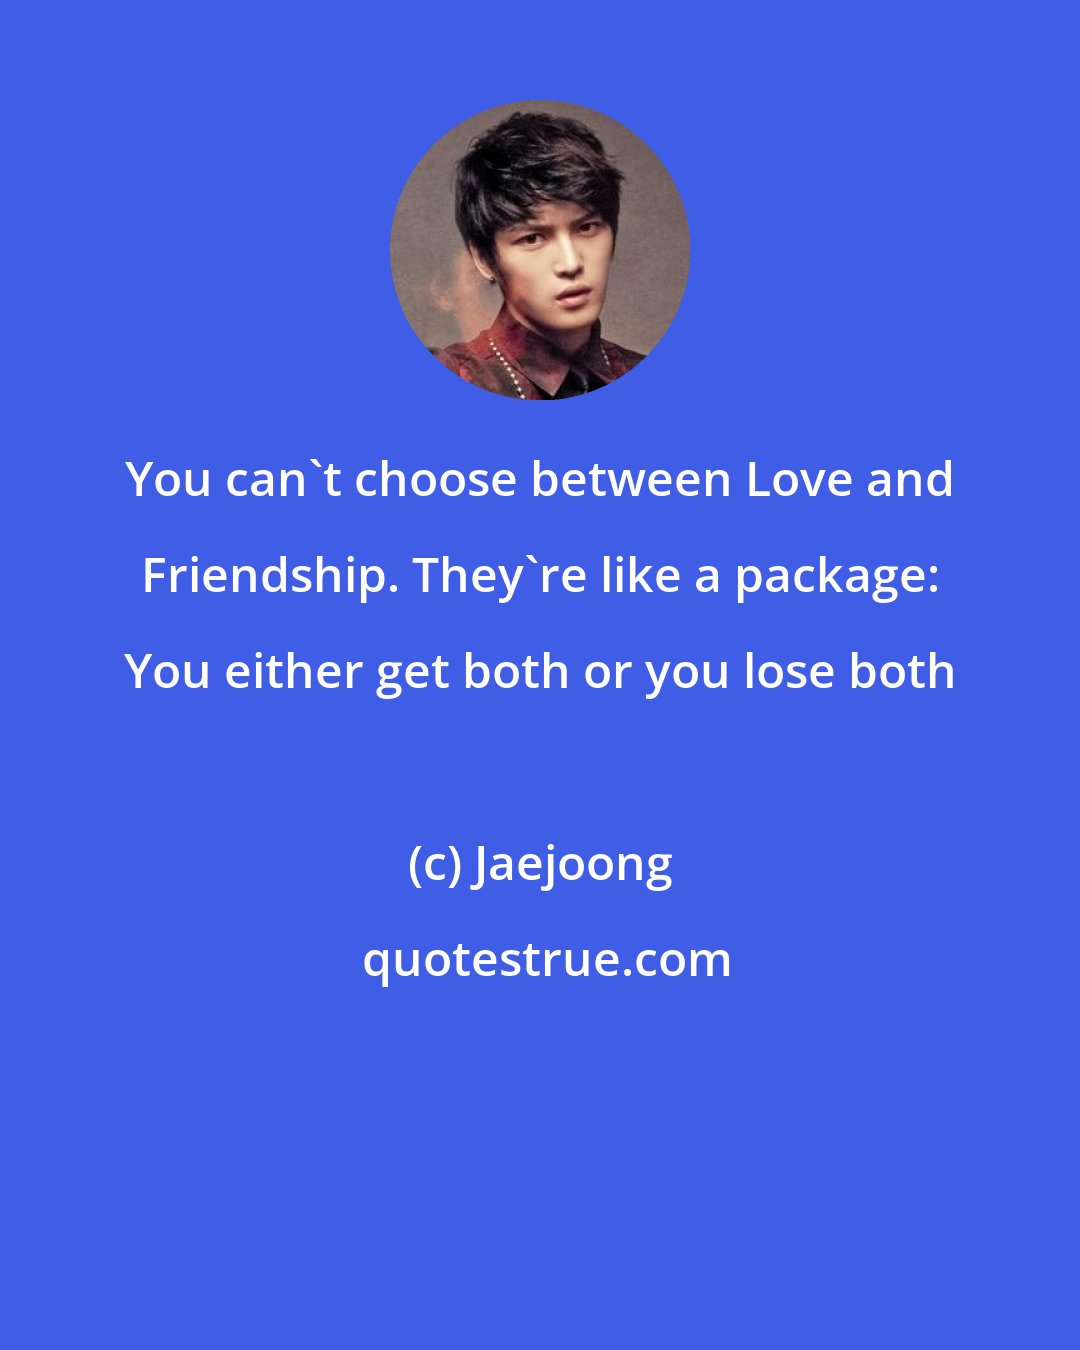 Jaejoong: You can't choose between Love and Friendship. They're like a package: You either get both or you lose both